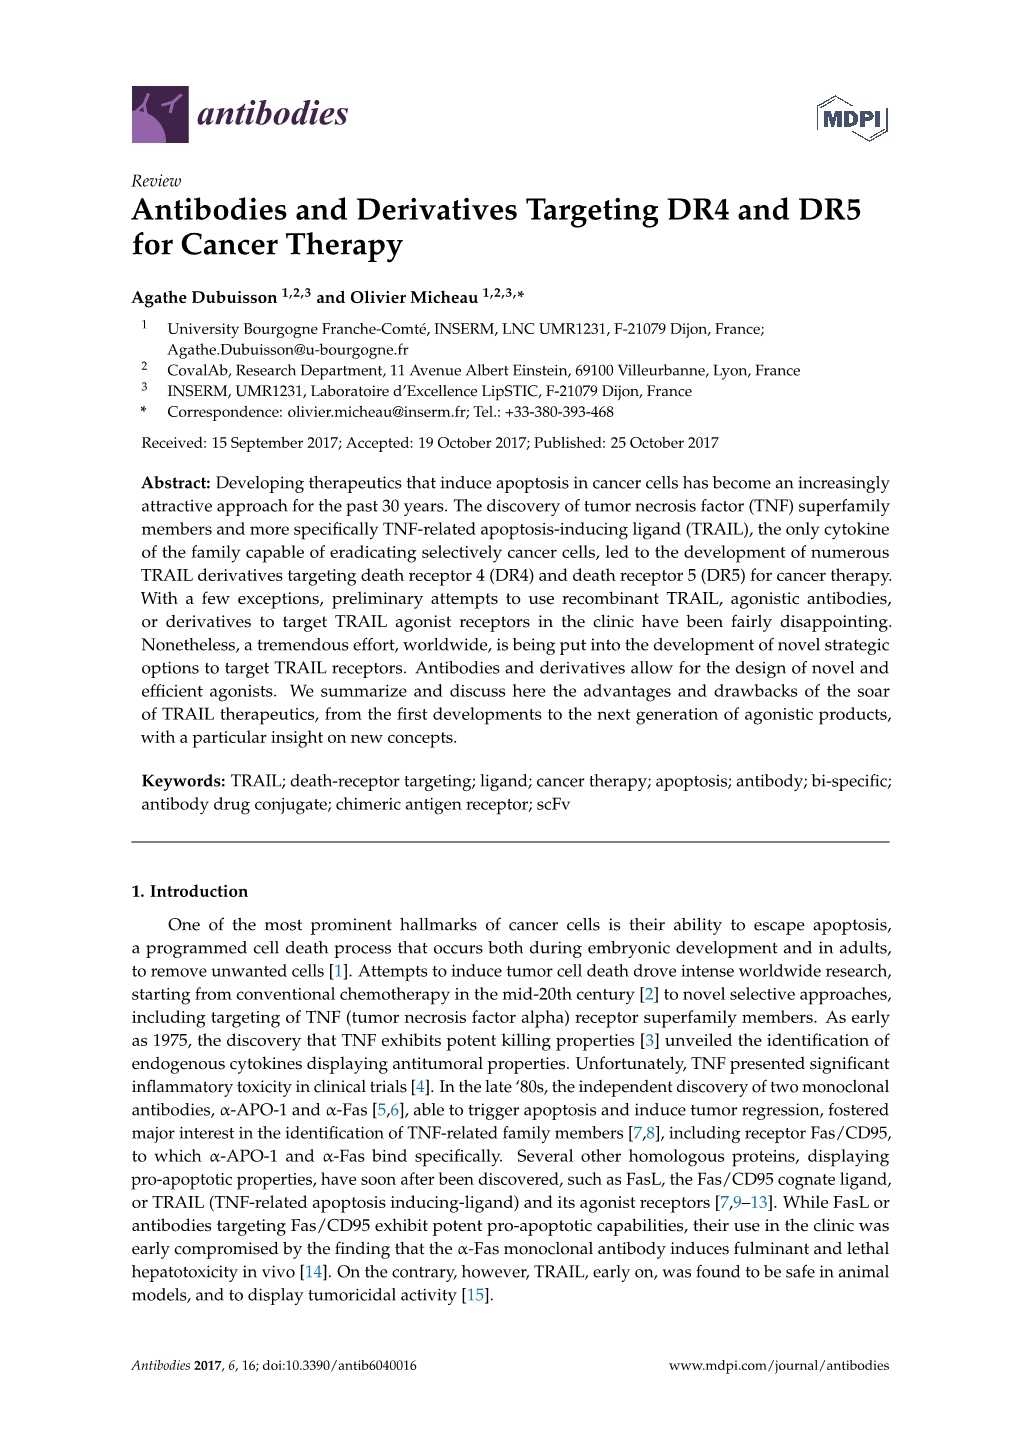 Antibodies and Derivatives Targeting DR4 and DR5 for Cancer Therapy